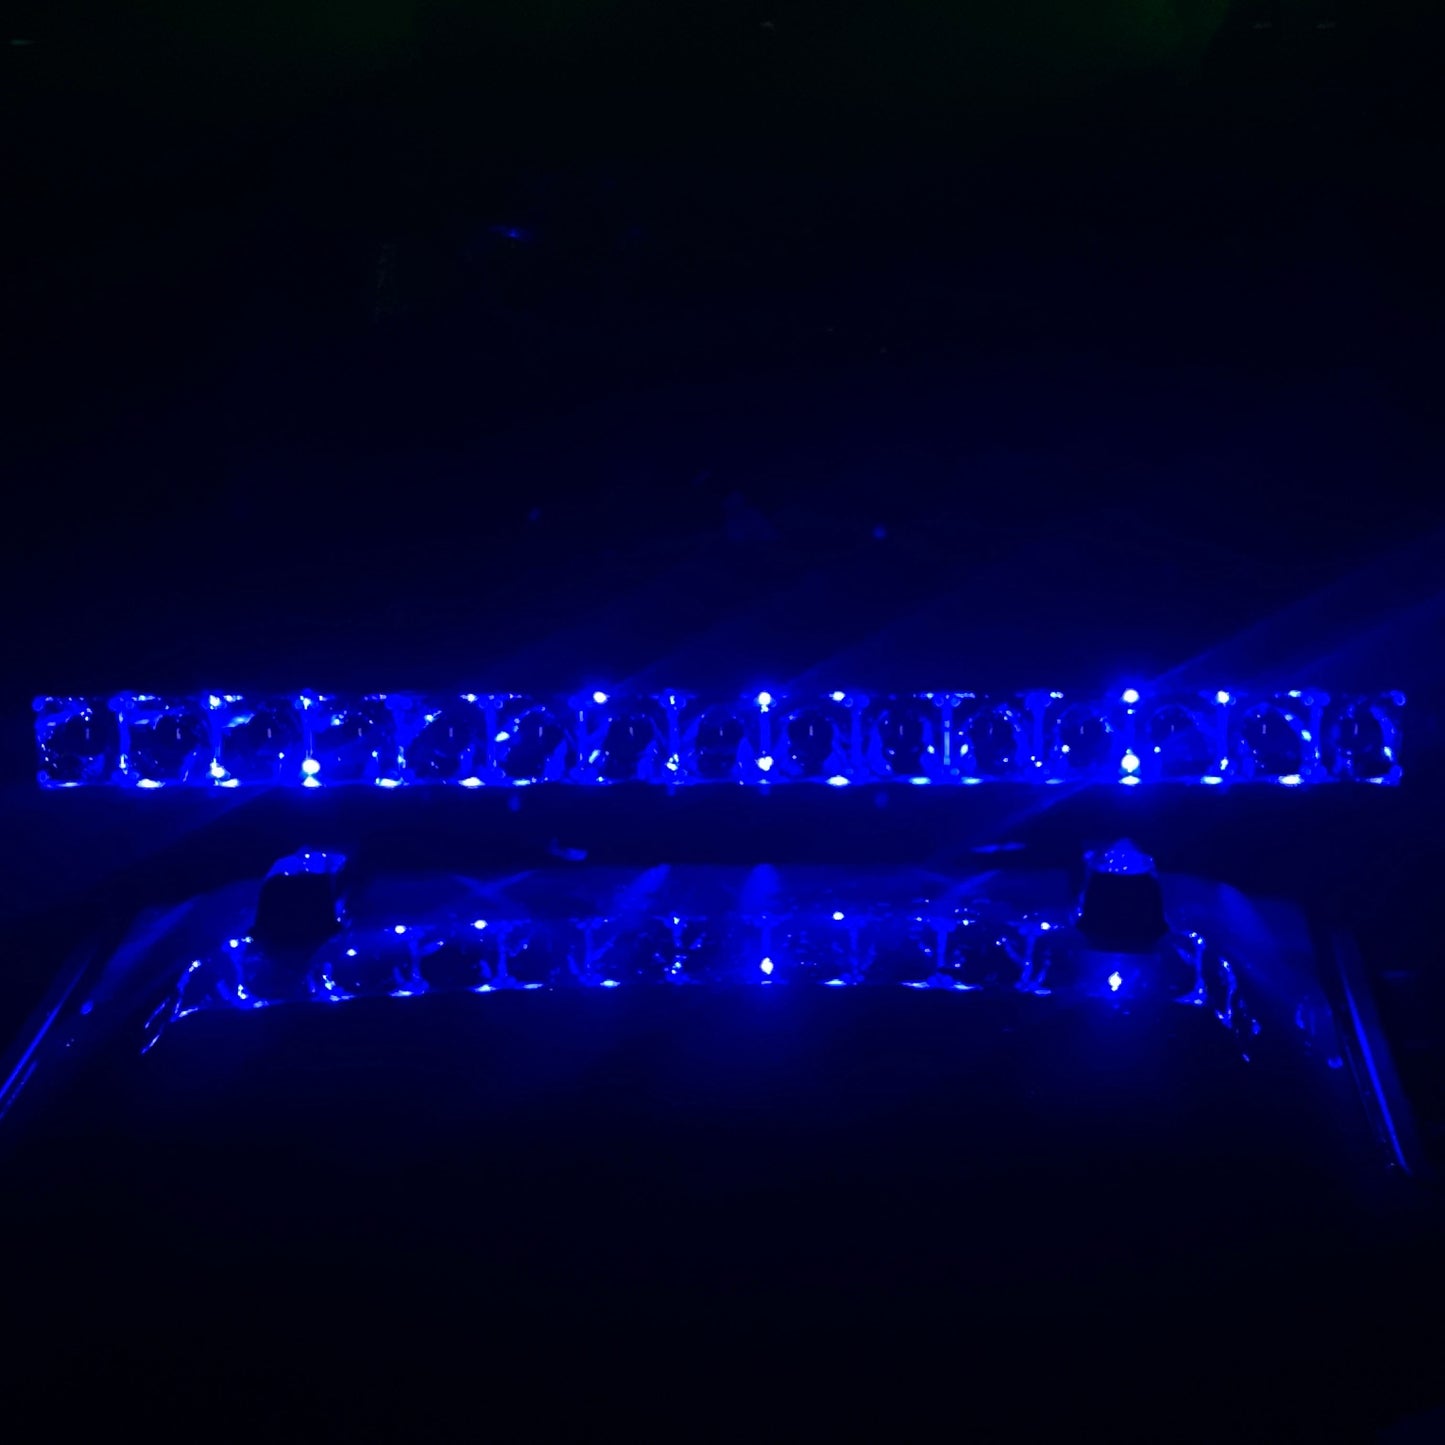 Pure White Light Bar with Backlit RGB